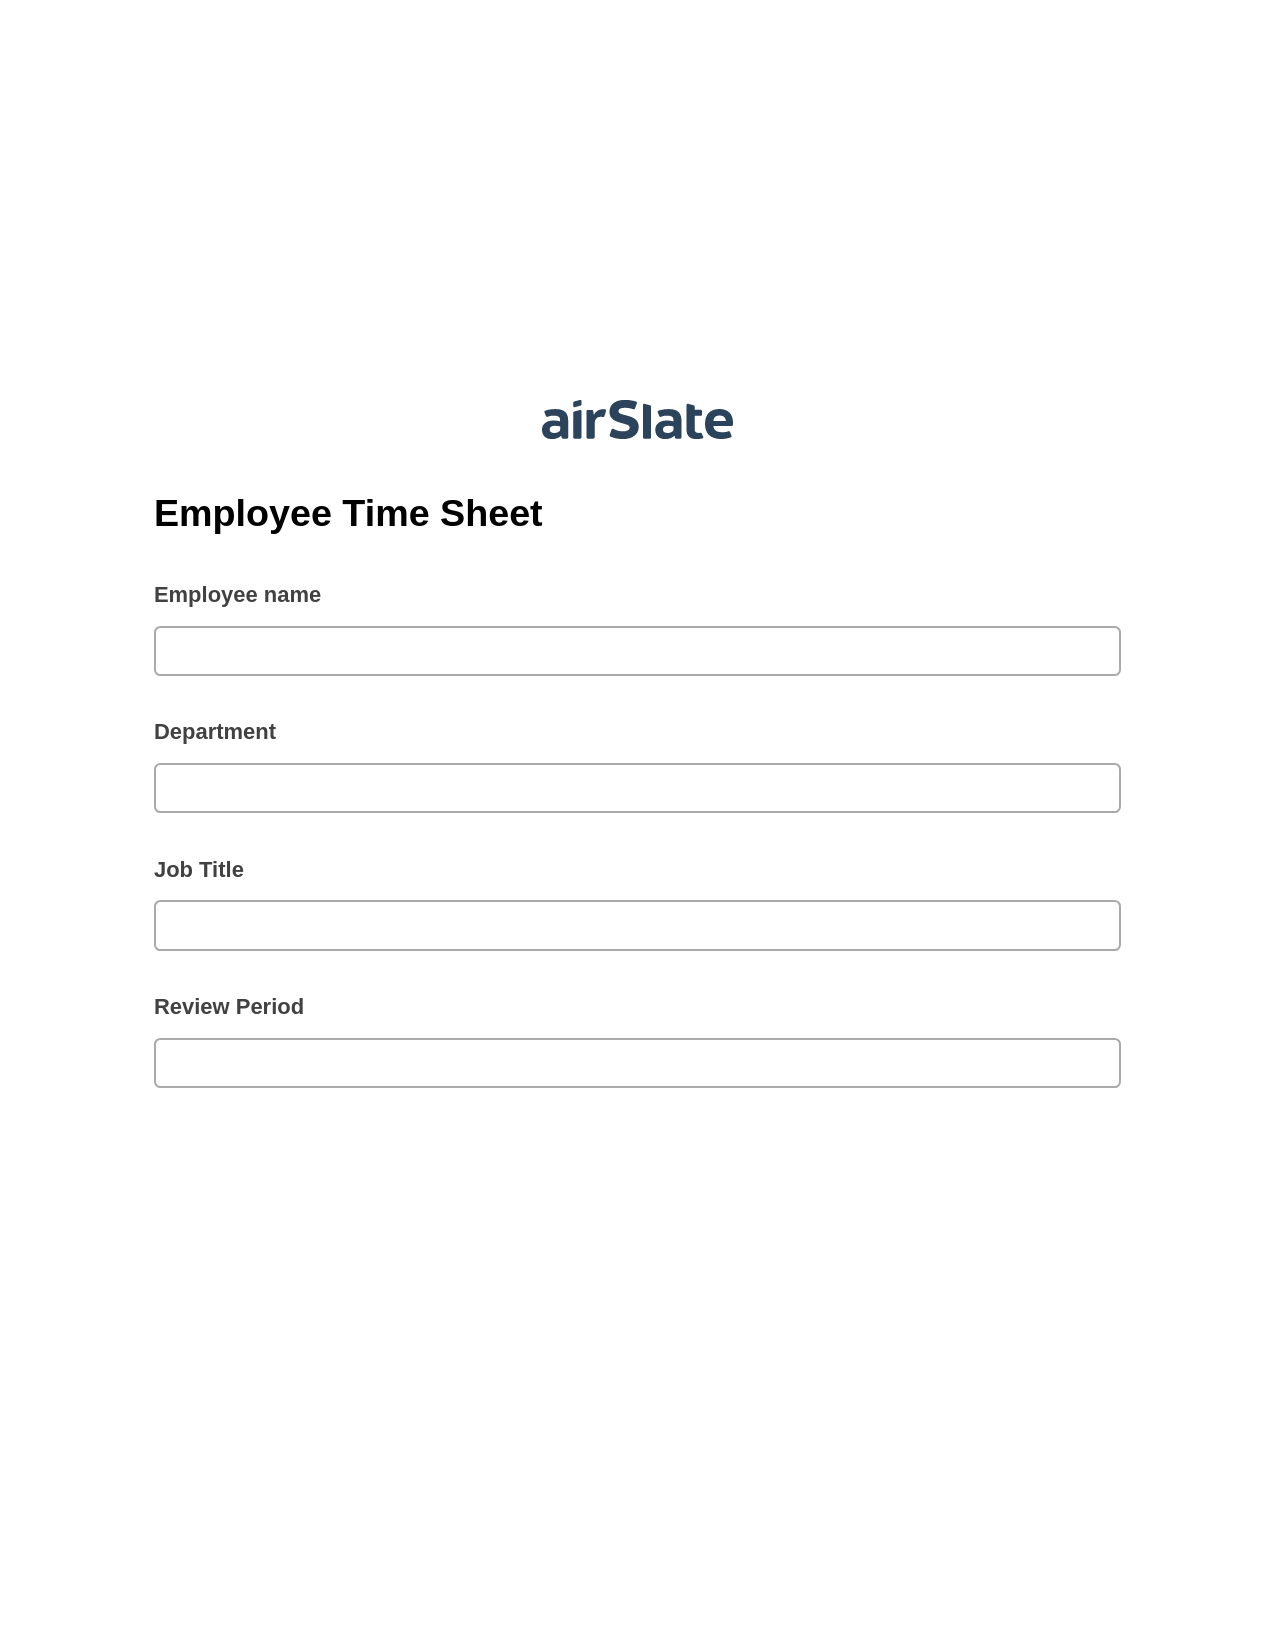 Employee Time Sheet Pre-fill from Salesforce Records with SOQL Bot, Update Audit Trail Bot, Export to Google Sheet Bot